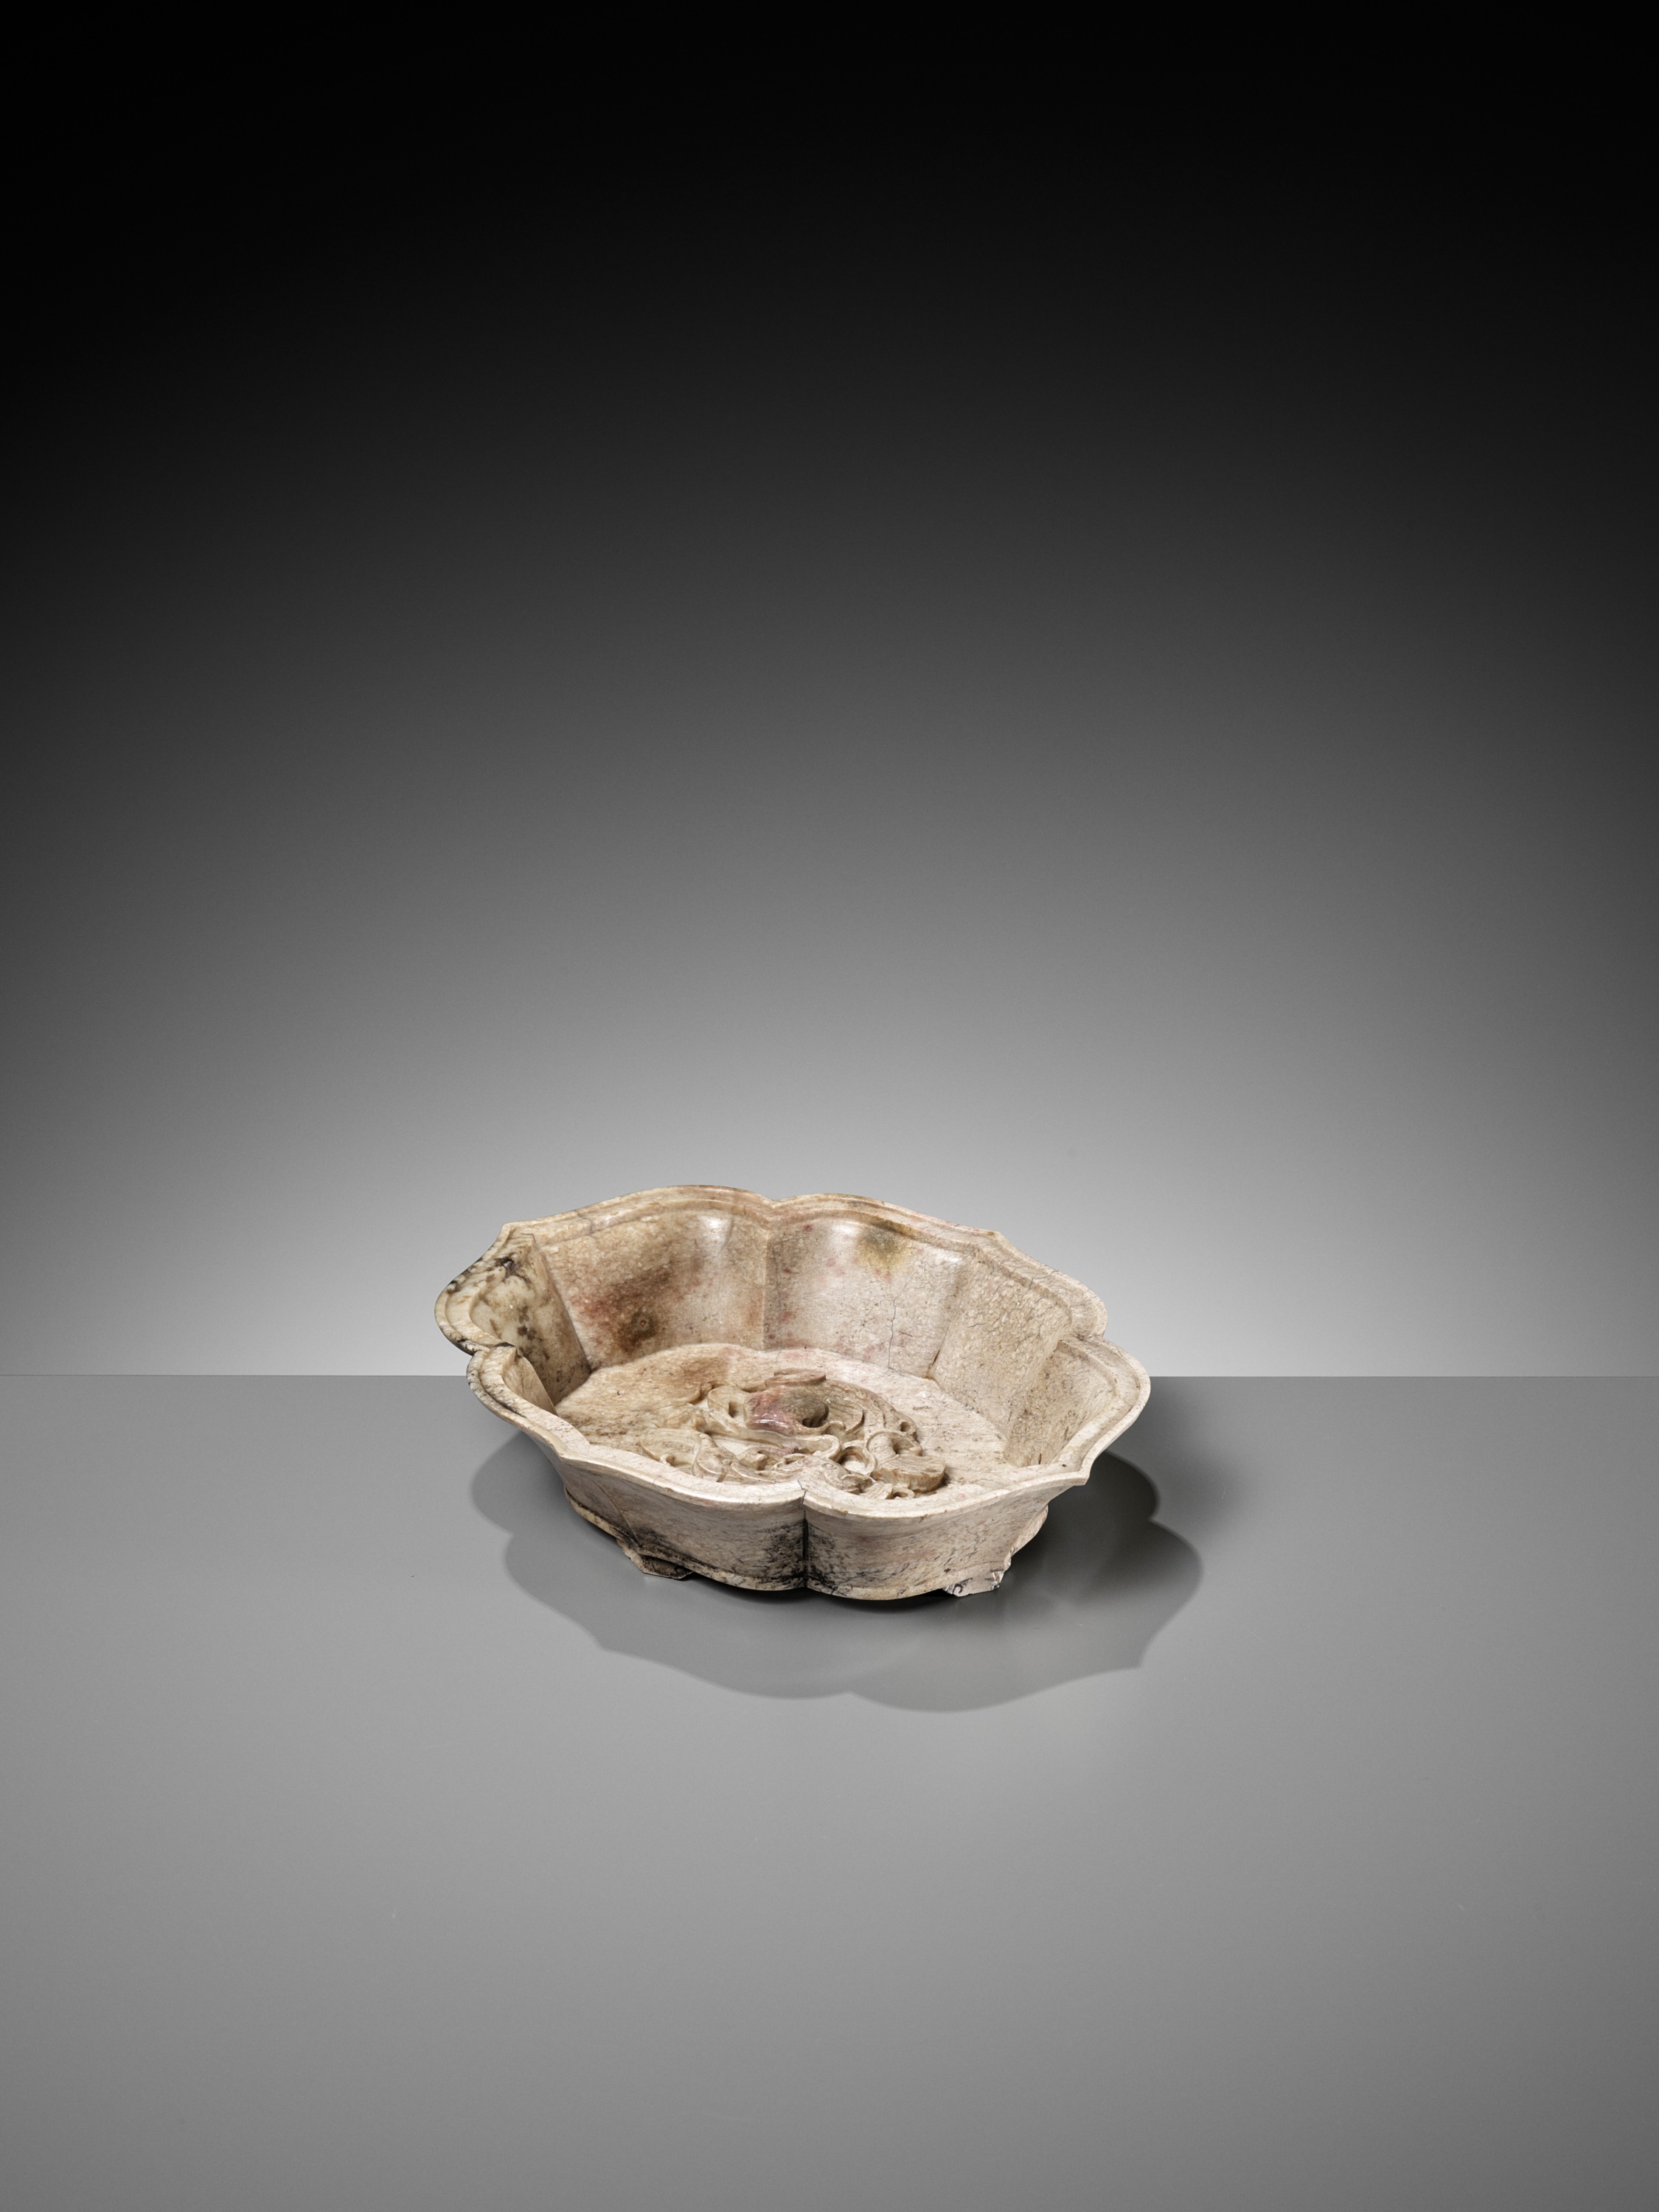 A CHICKEN BONE JADE 'DOUBLE FISH' MARRIAGE BOWL, 17TH-18TH CENTURY - Image 9 of 16